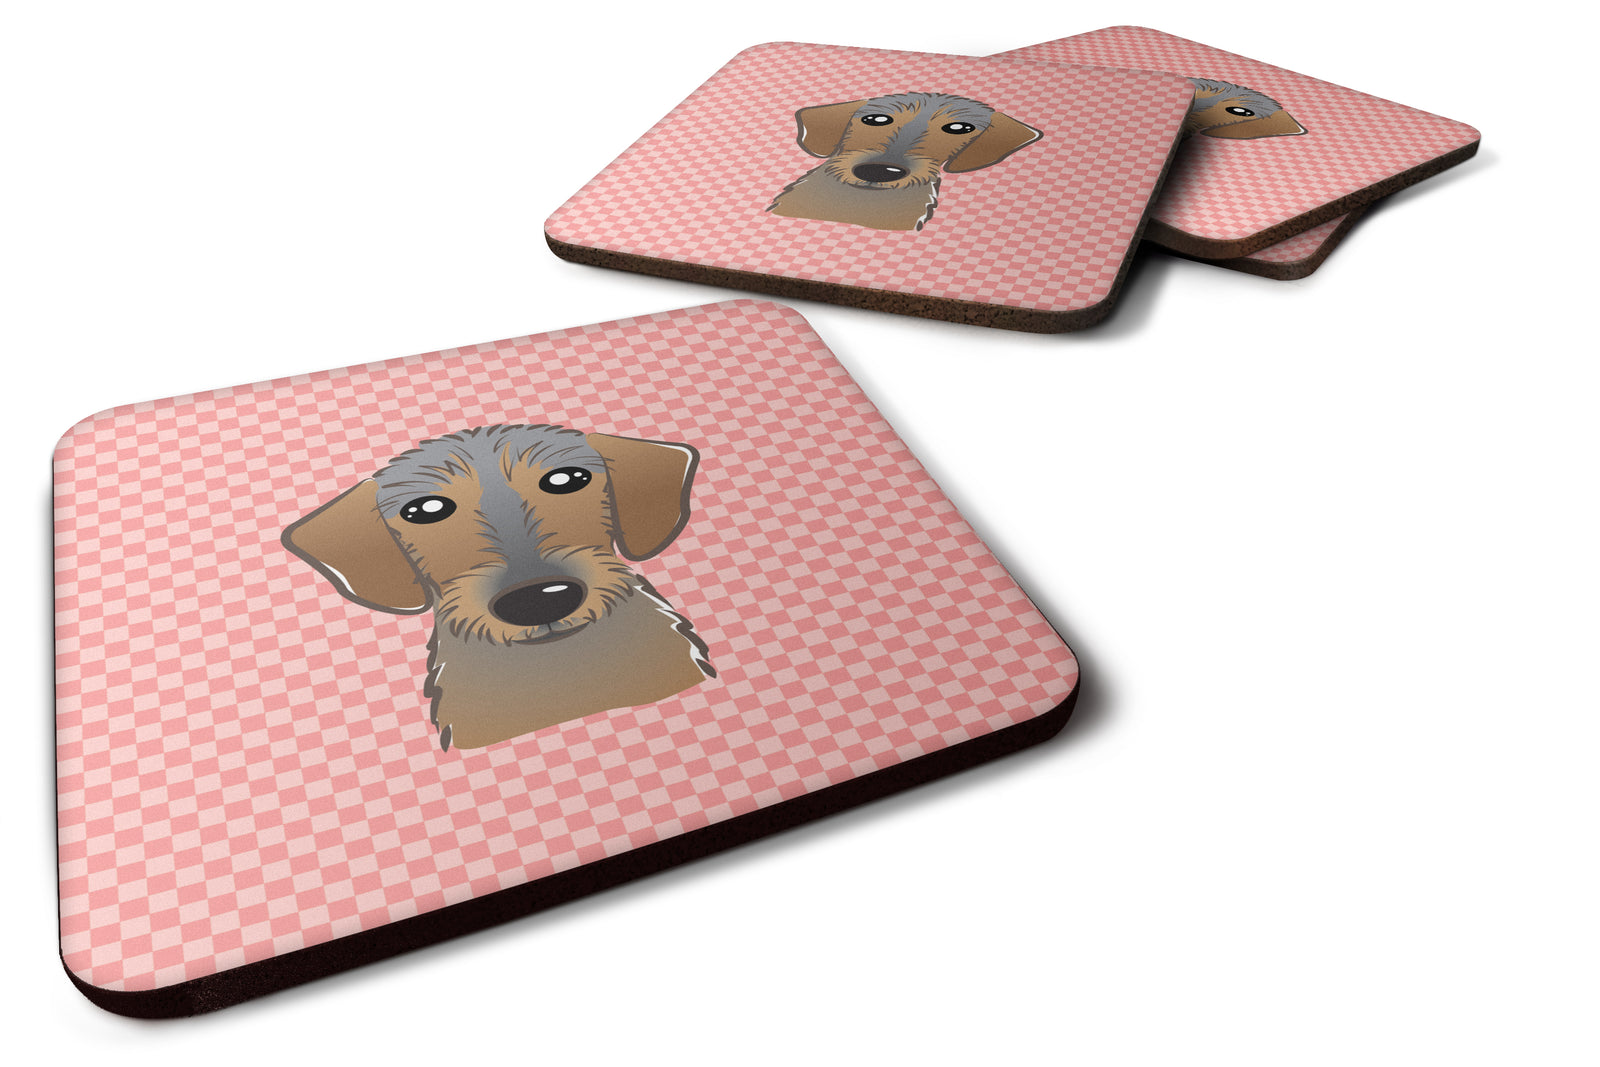 Set of 4 Checkerboard Pink Wirehaired Dachshund Foam Coasters BB1233FC - the-store.com